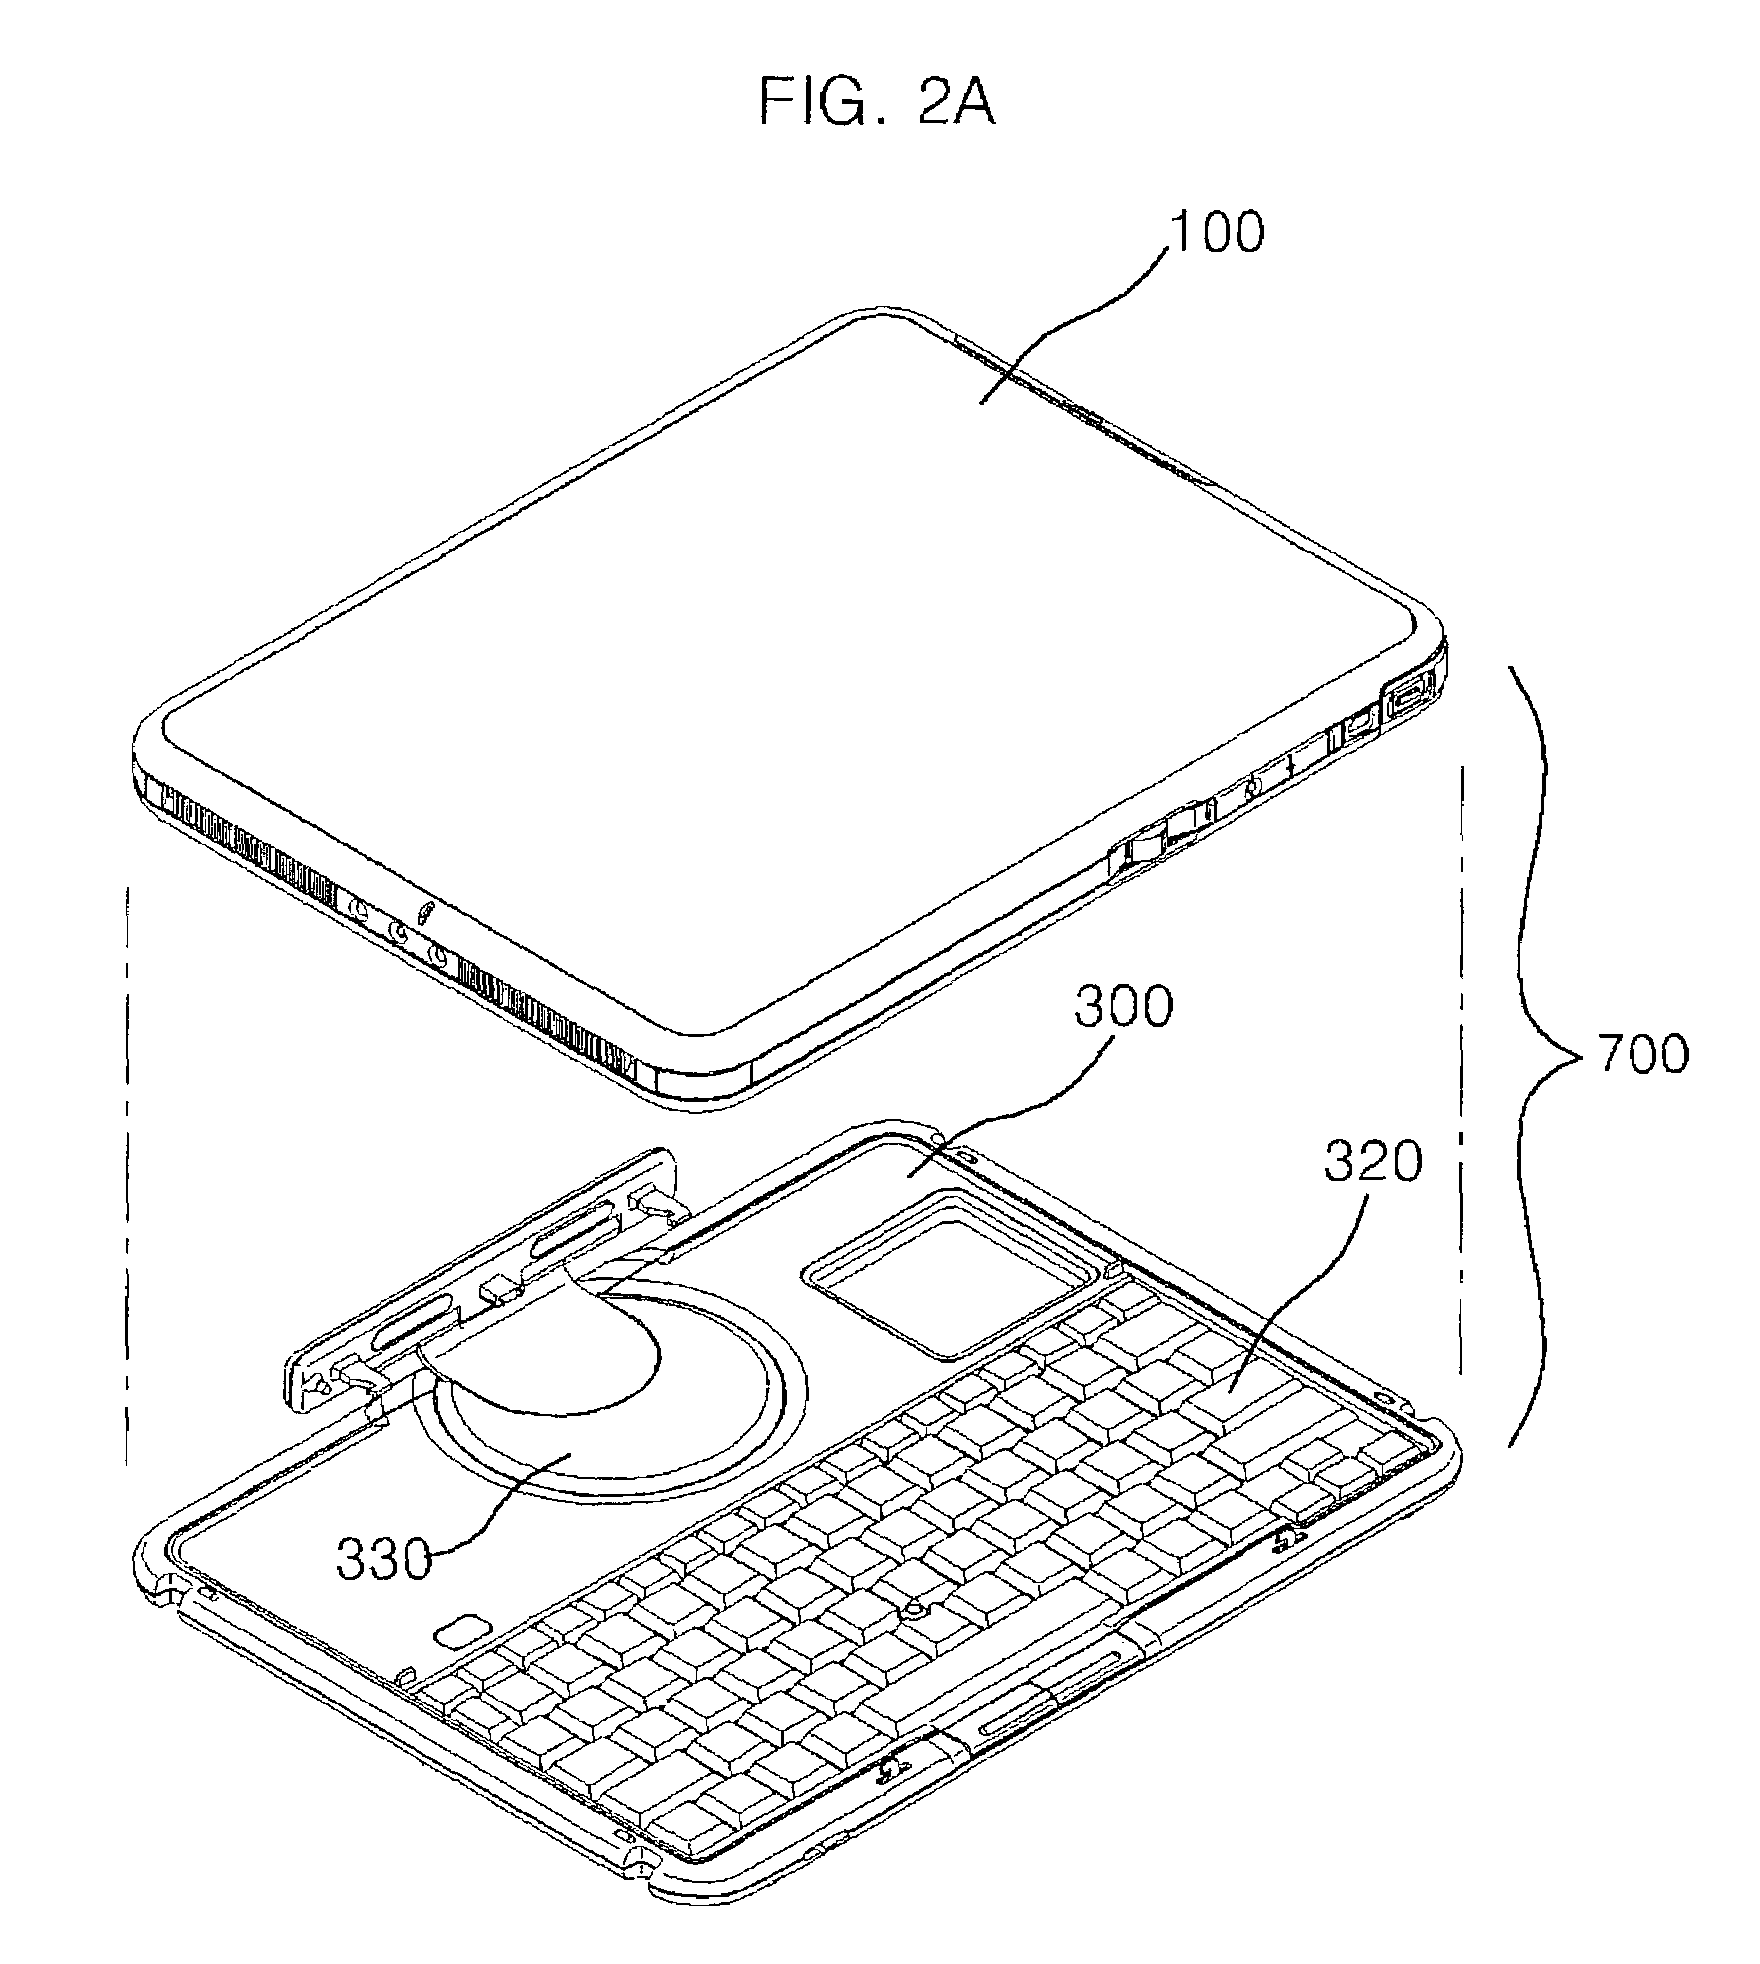 Docking station for a portable computer